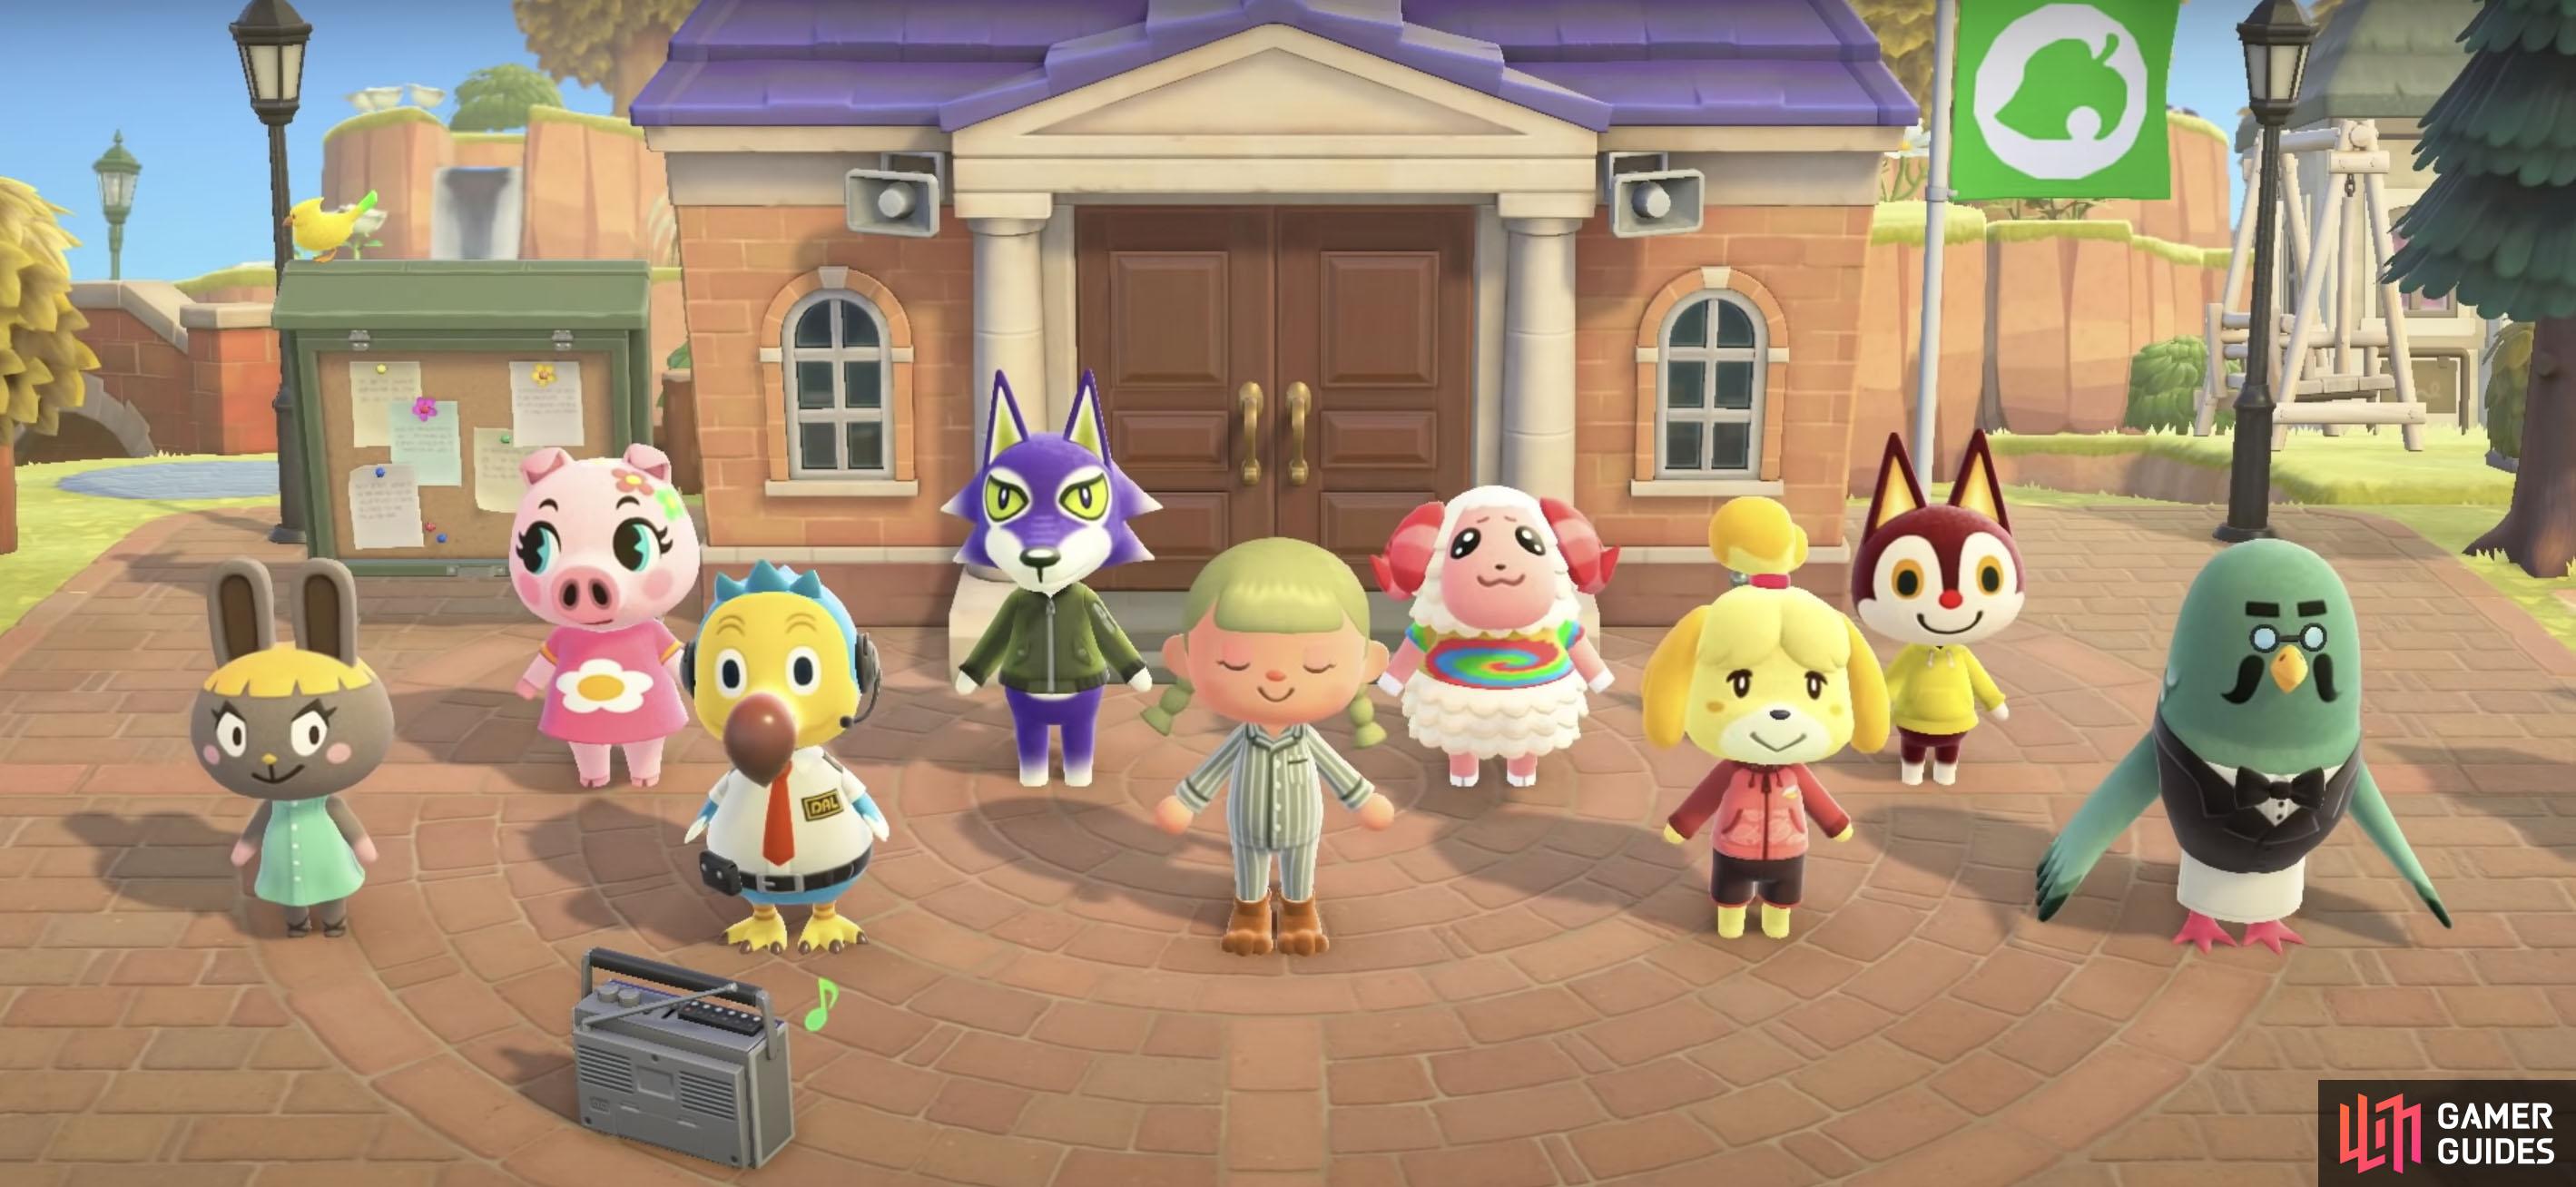 All of the villagers can join in on stretching - and the residents too.